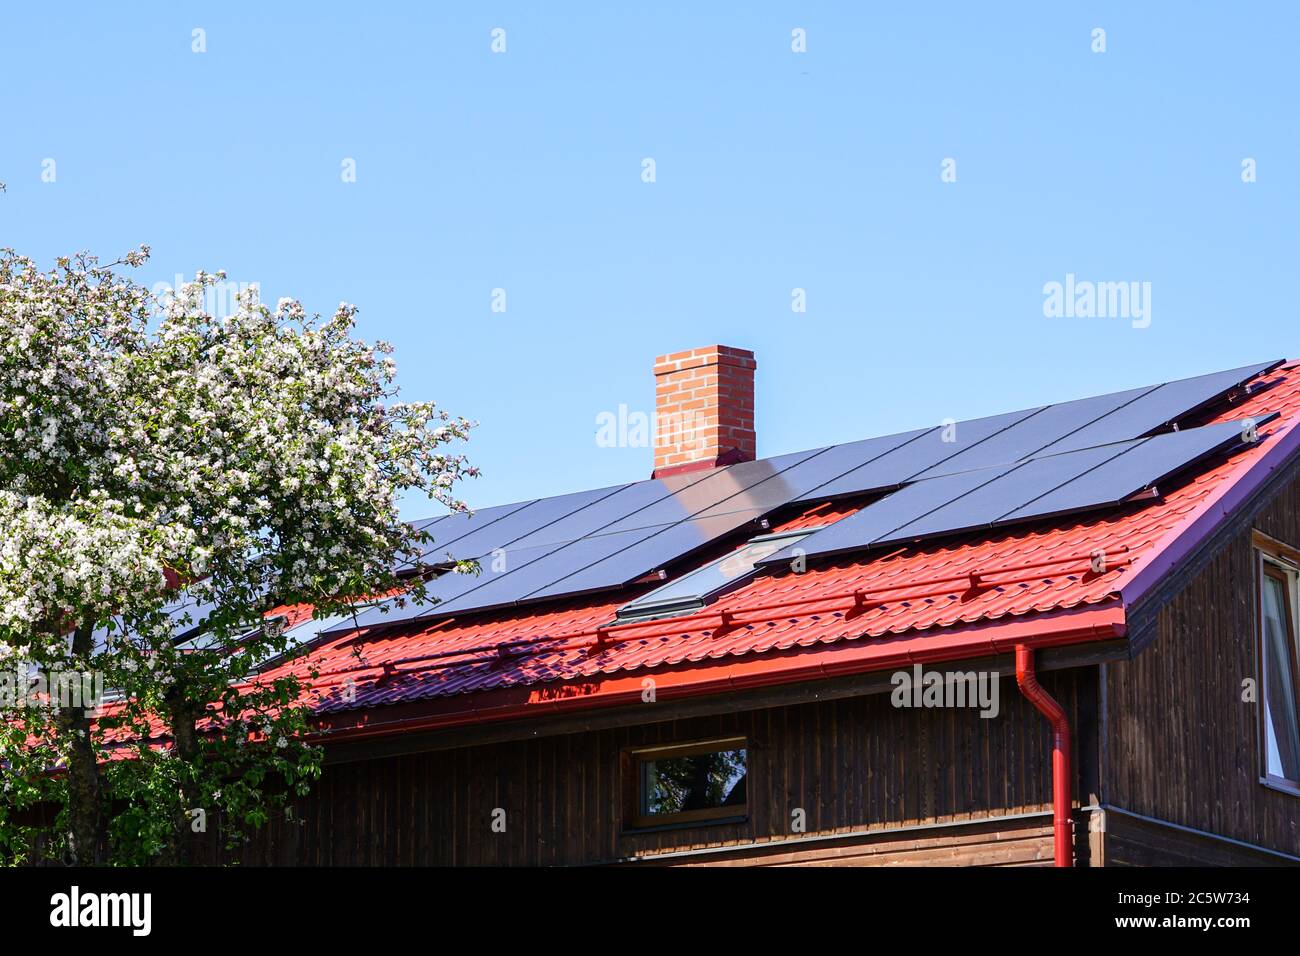 Solar panels on a red roof of the modern house Stock Photo